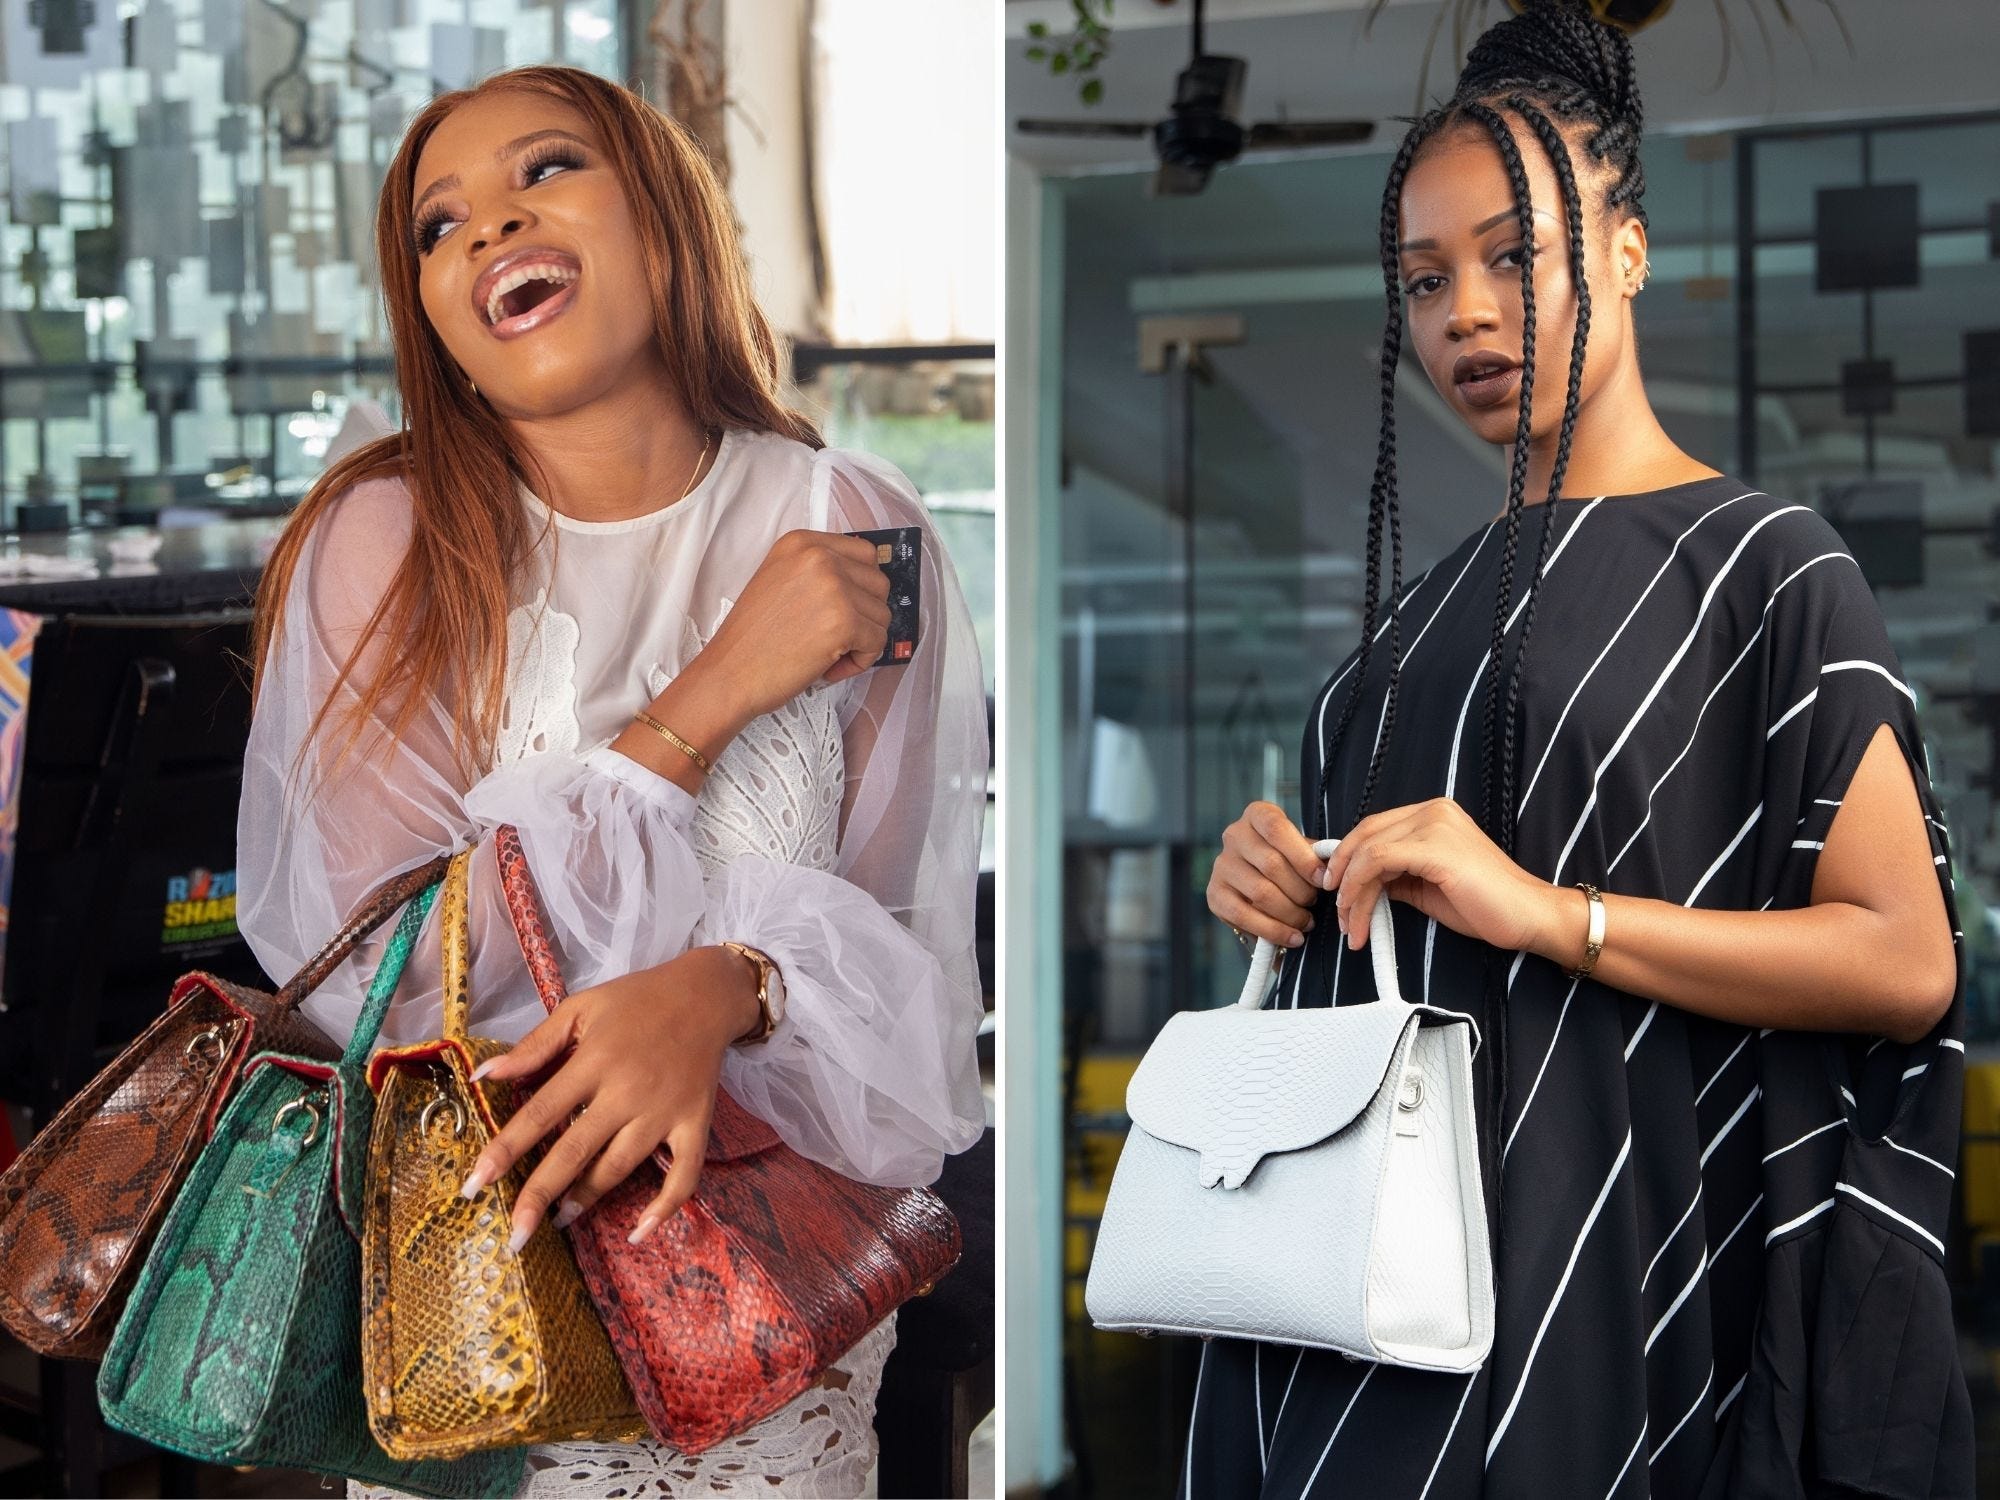 Left: Woman holds four Winston Leather handbags with animal-print patterns -- from left to right, the bags are: dark-red, green, mustard-yellow, and light-red. Right: A woman holds a white Winston Leather handbag with a top handle.